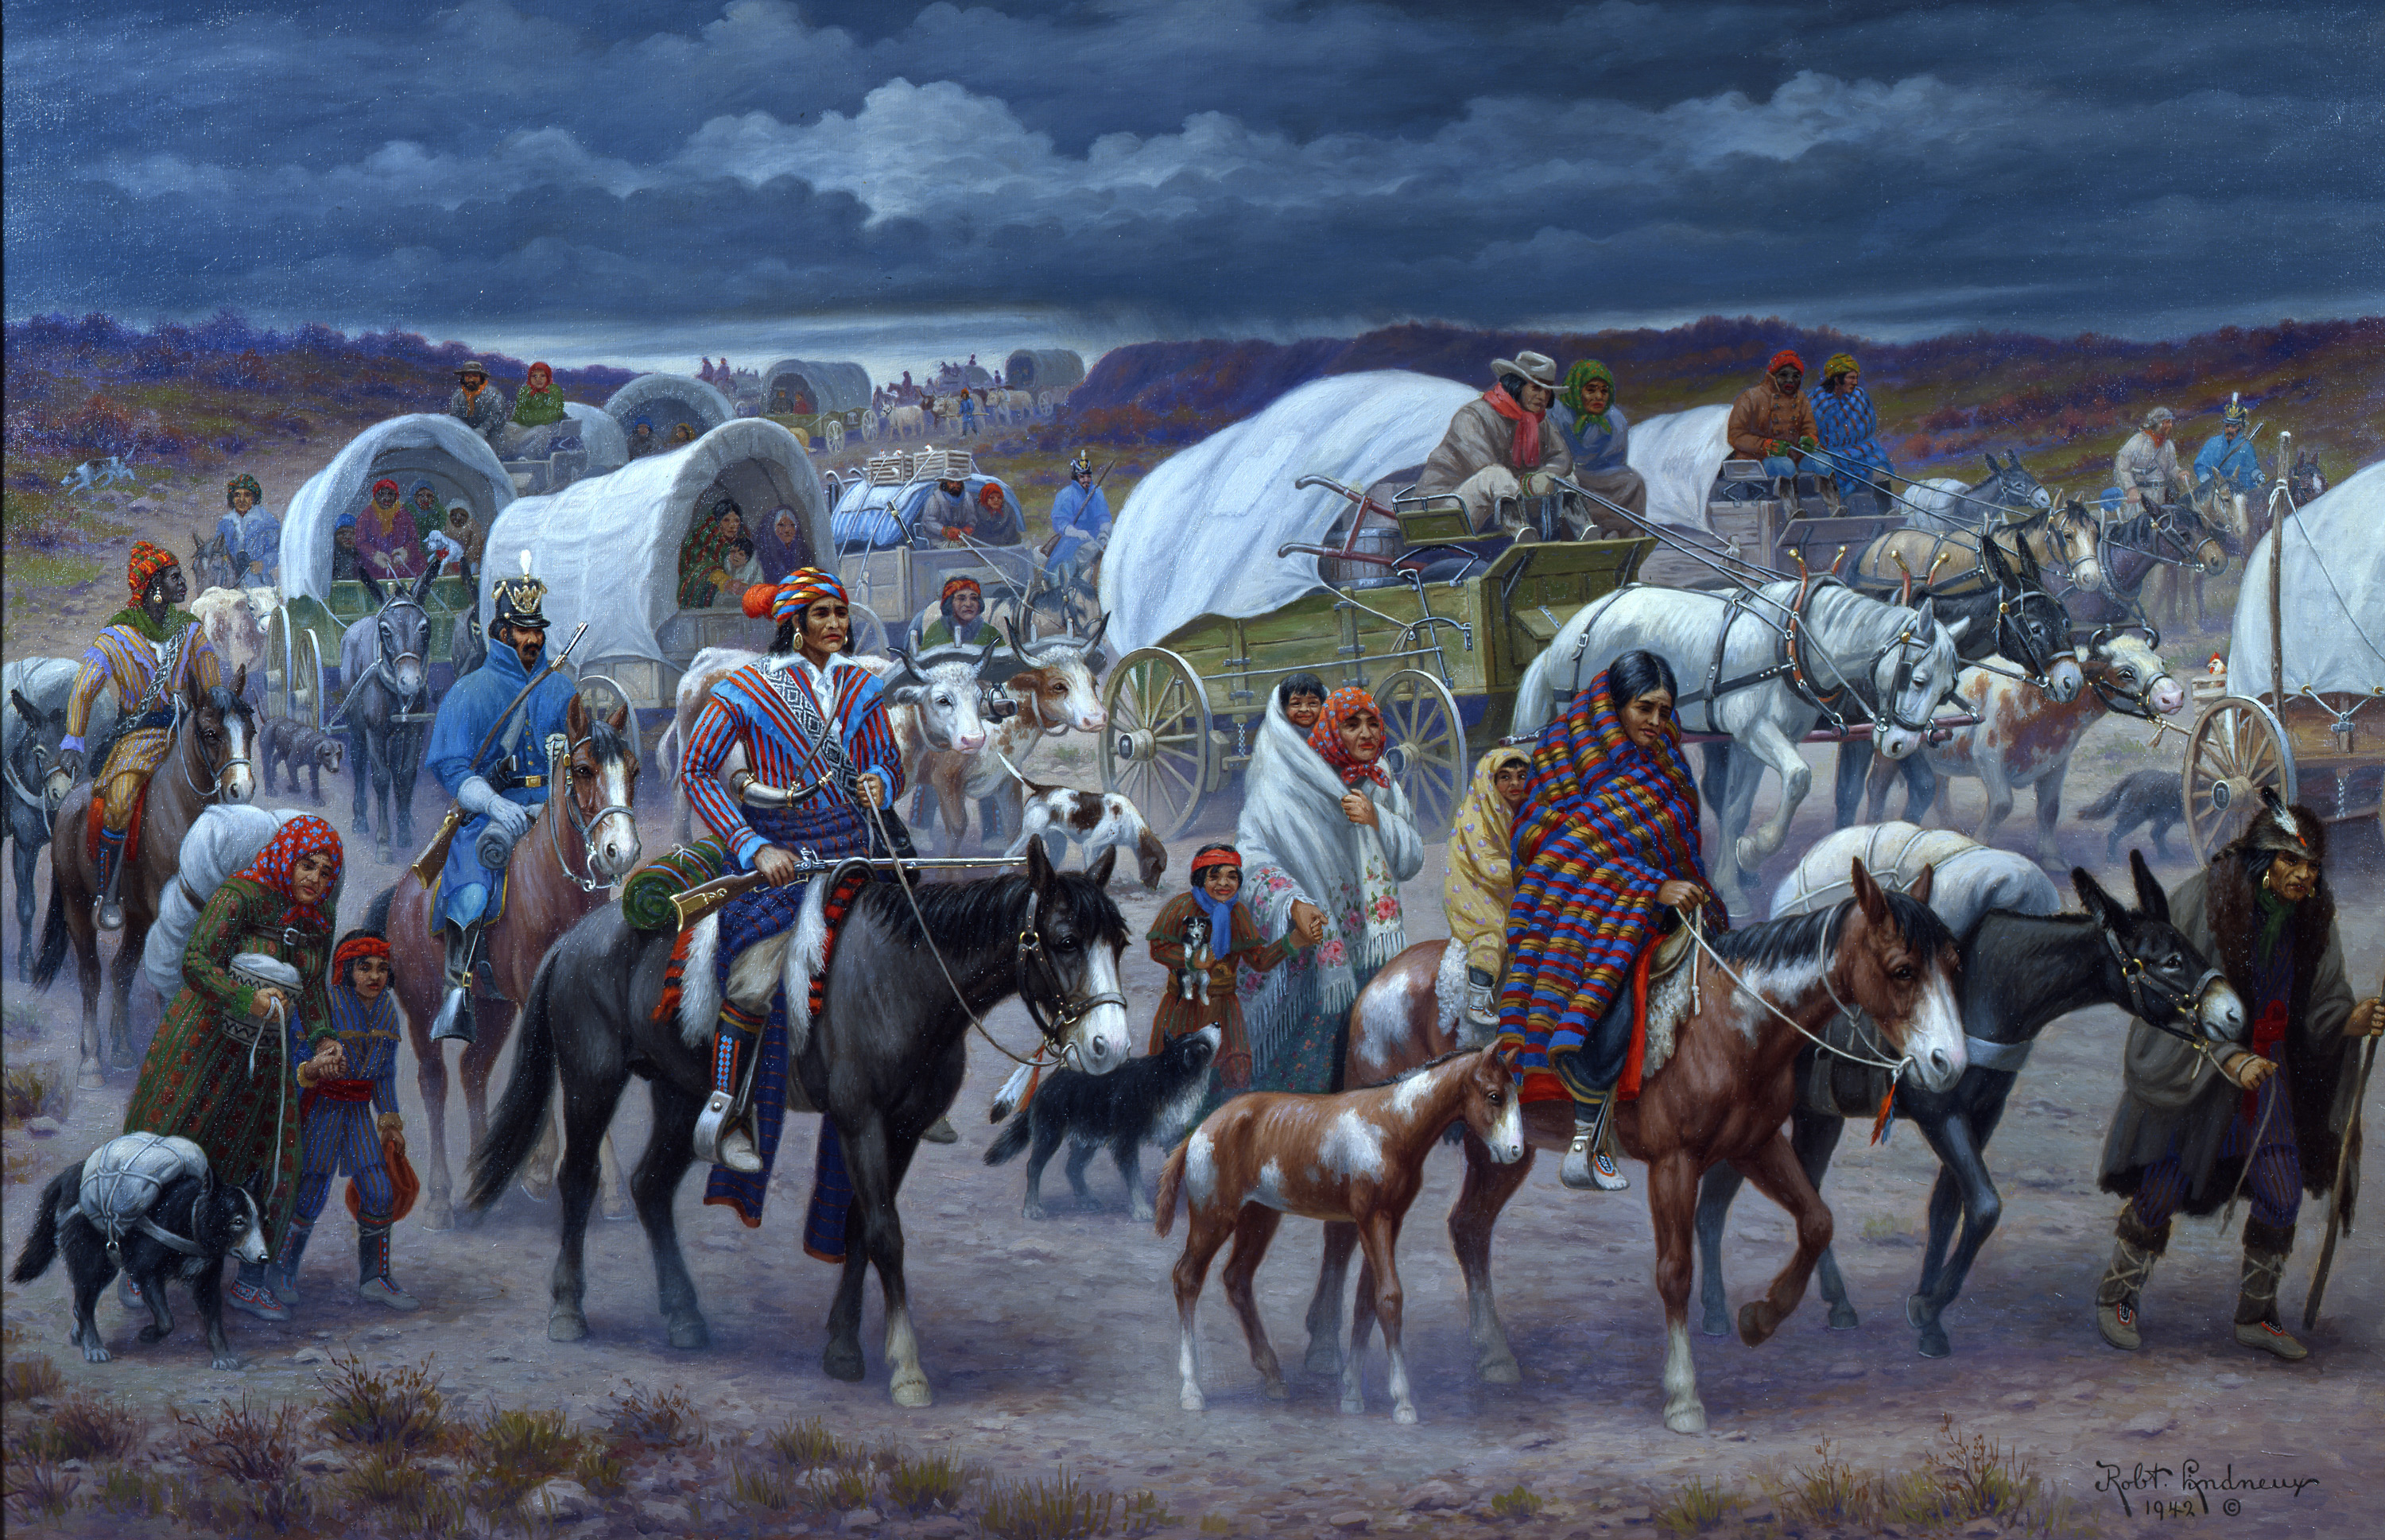 [Source: Smithsonian Institution. National Museum of the American Indian | Robert Lindneux (1871–1970). The Trail of Tears, 1942. Woolaroc Museum, Bartlesville, Oklahoma.]